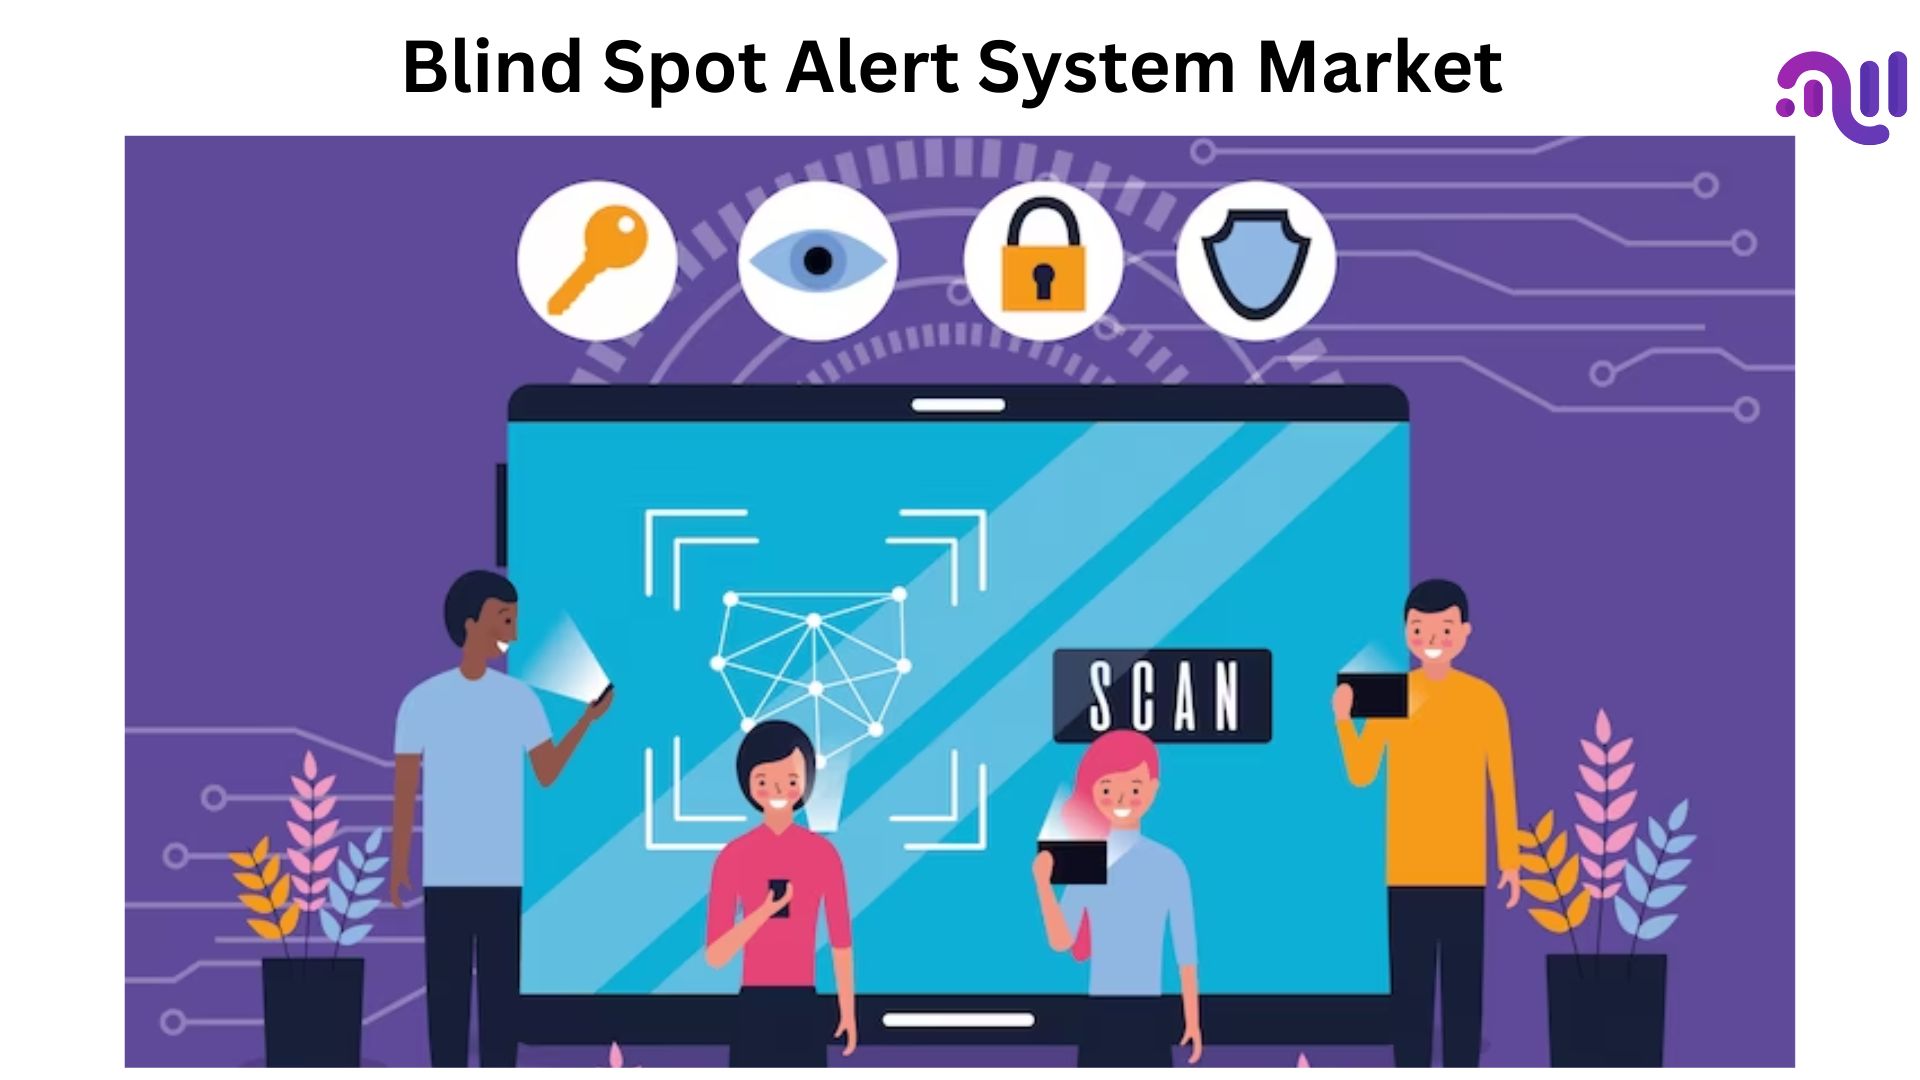 Blind Spot Alert System Market Expected CAGR of 11.7% to Surpass USD 21 Billion by 2032